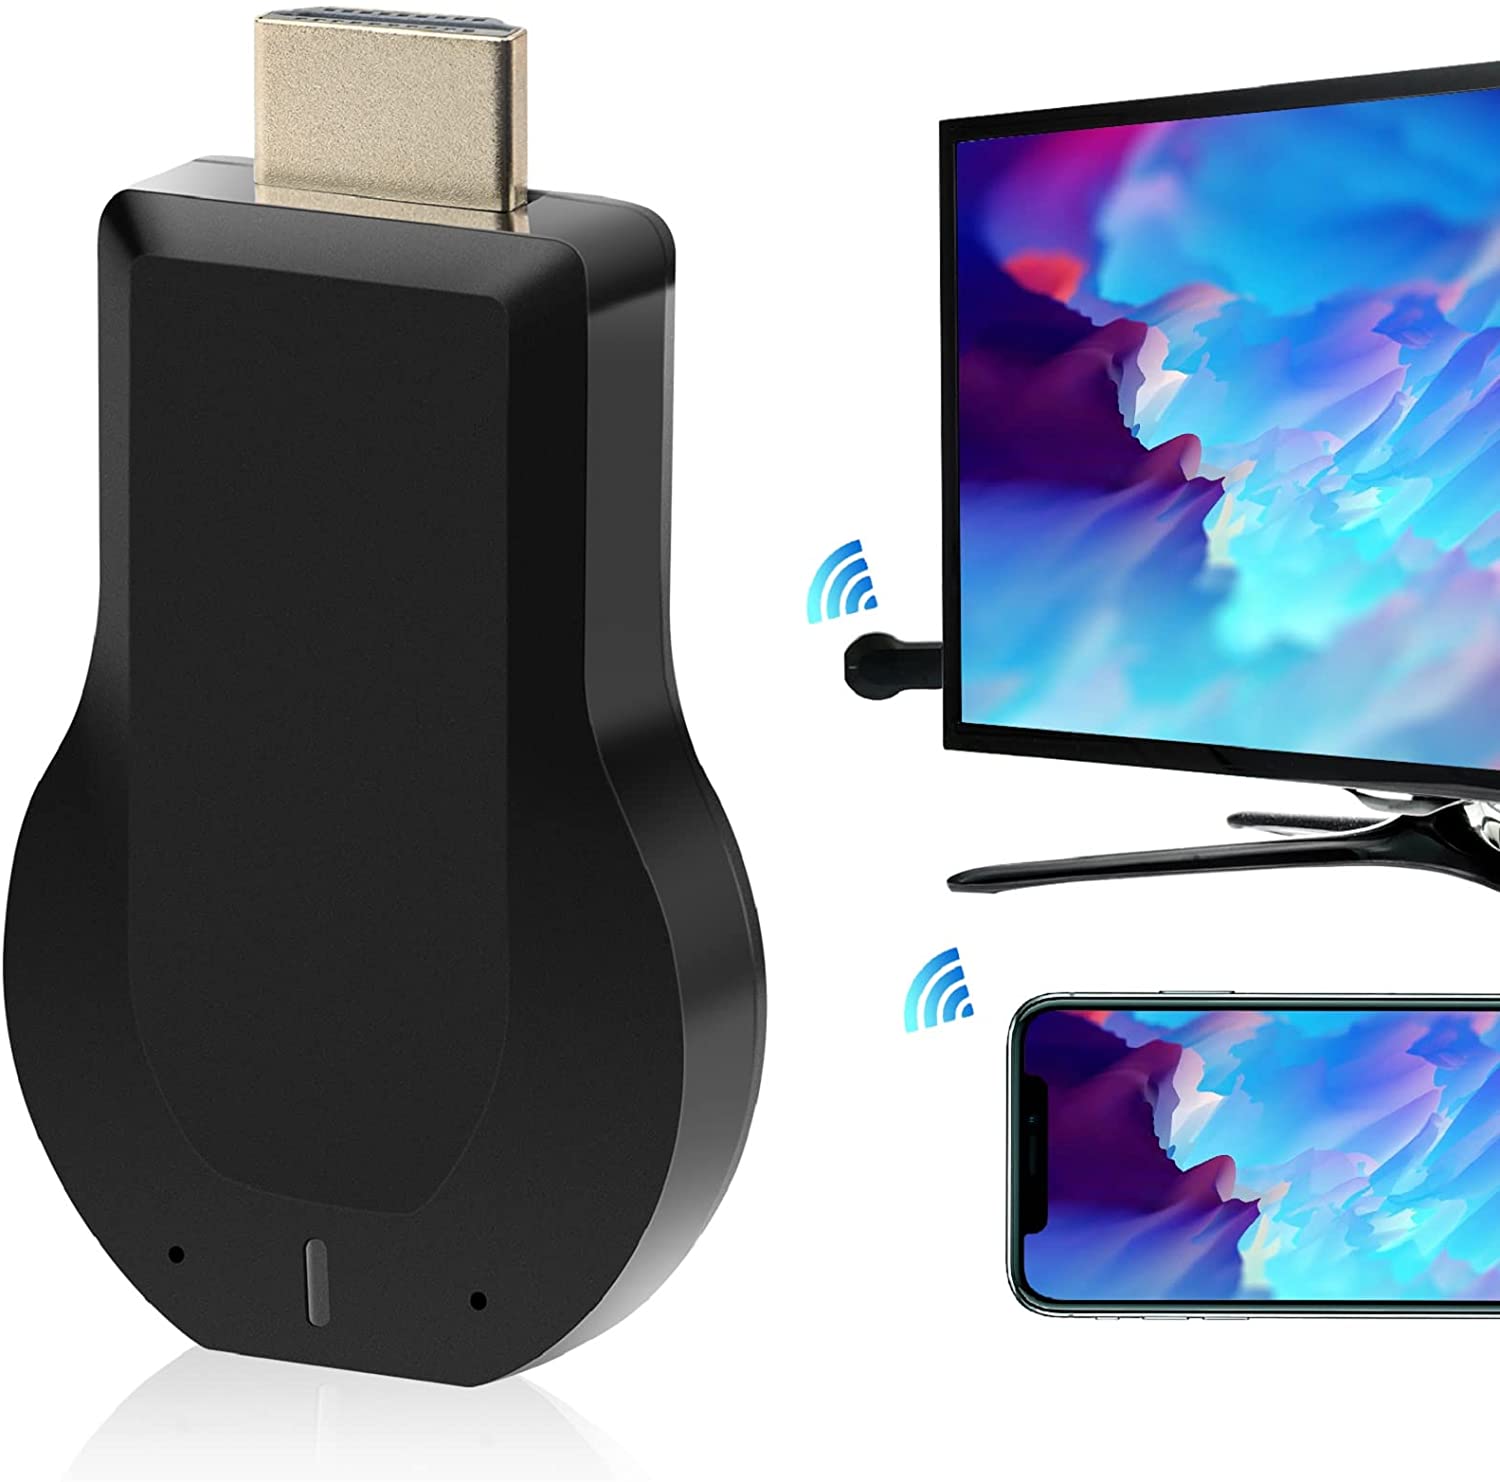 Aobeo 4K HDMI Wireless Display Adapter – WiFi 1080P Mobile Screen Mirroring Receiver Dongle to TV/Projector Receiver Support Windows Android Mac iOS, Black